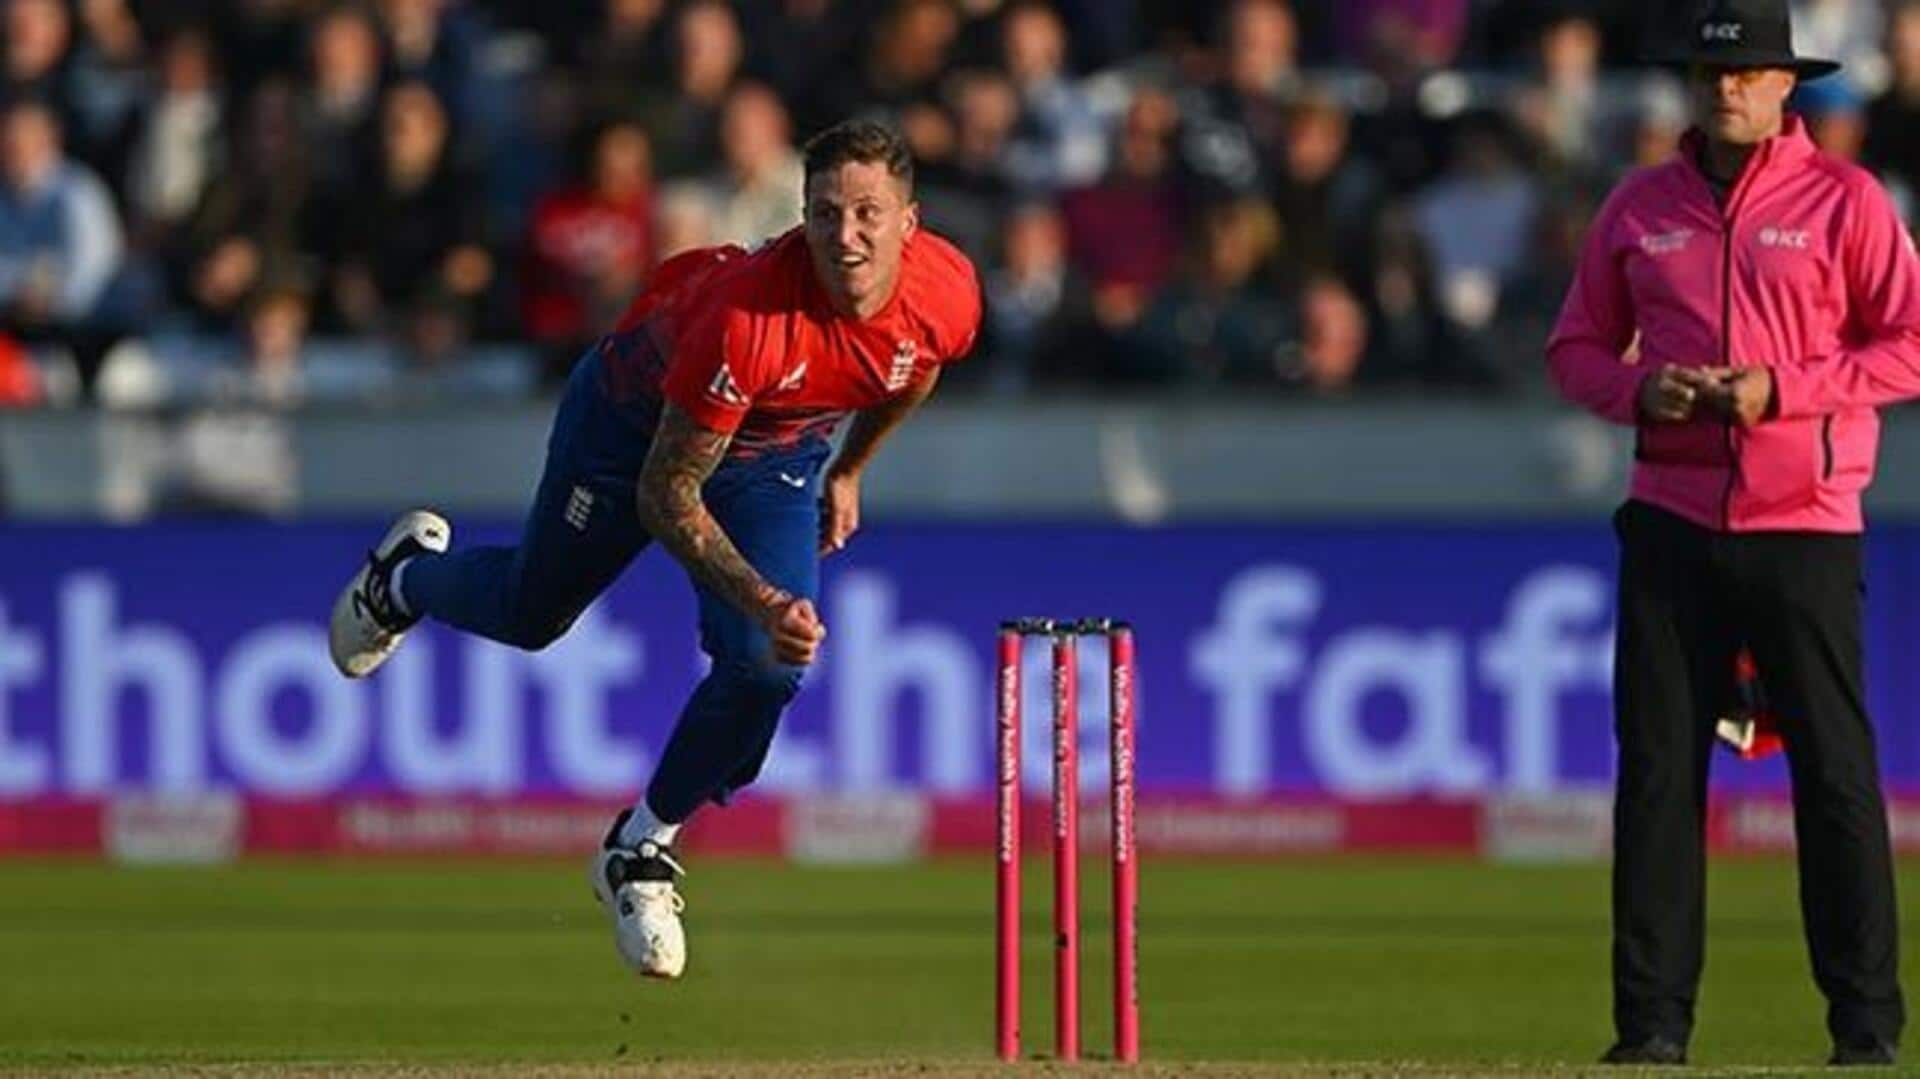 Brydon Carse replaces Reece Topley in England's World Cup squad